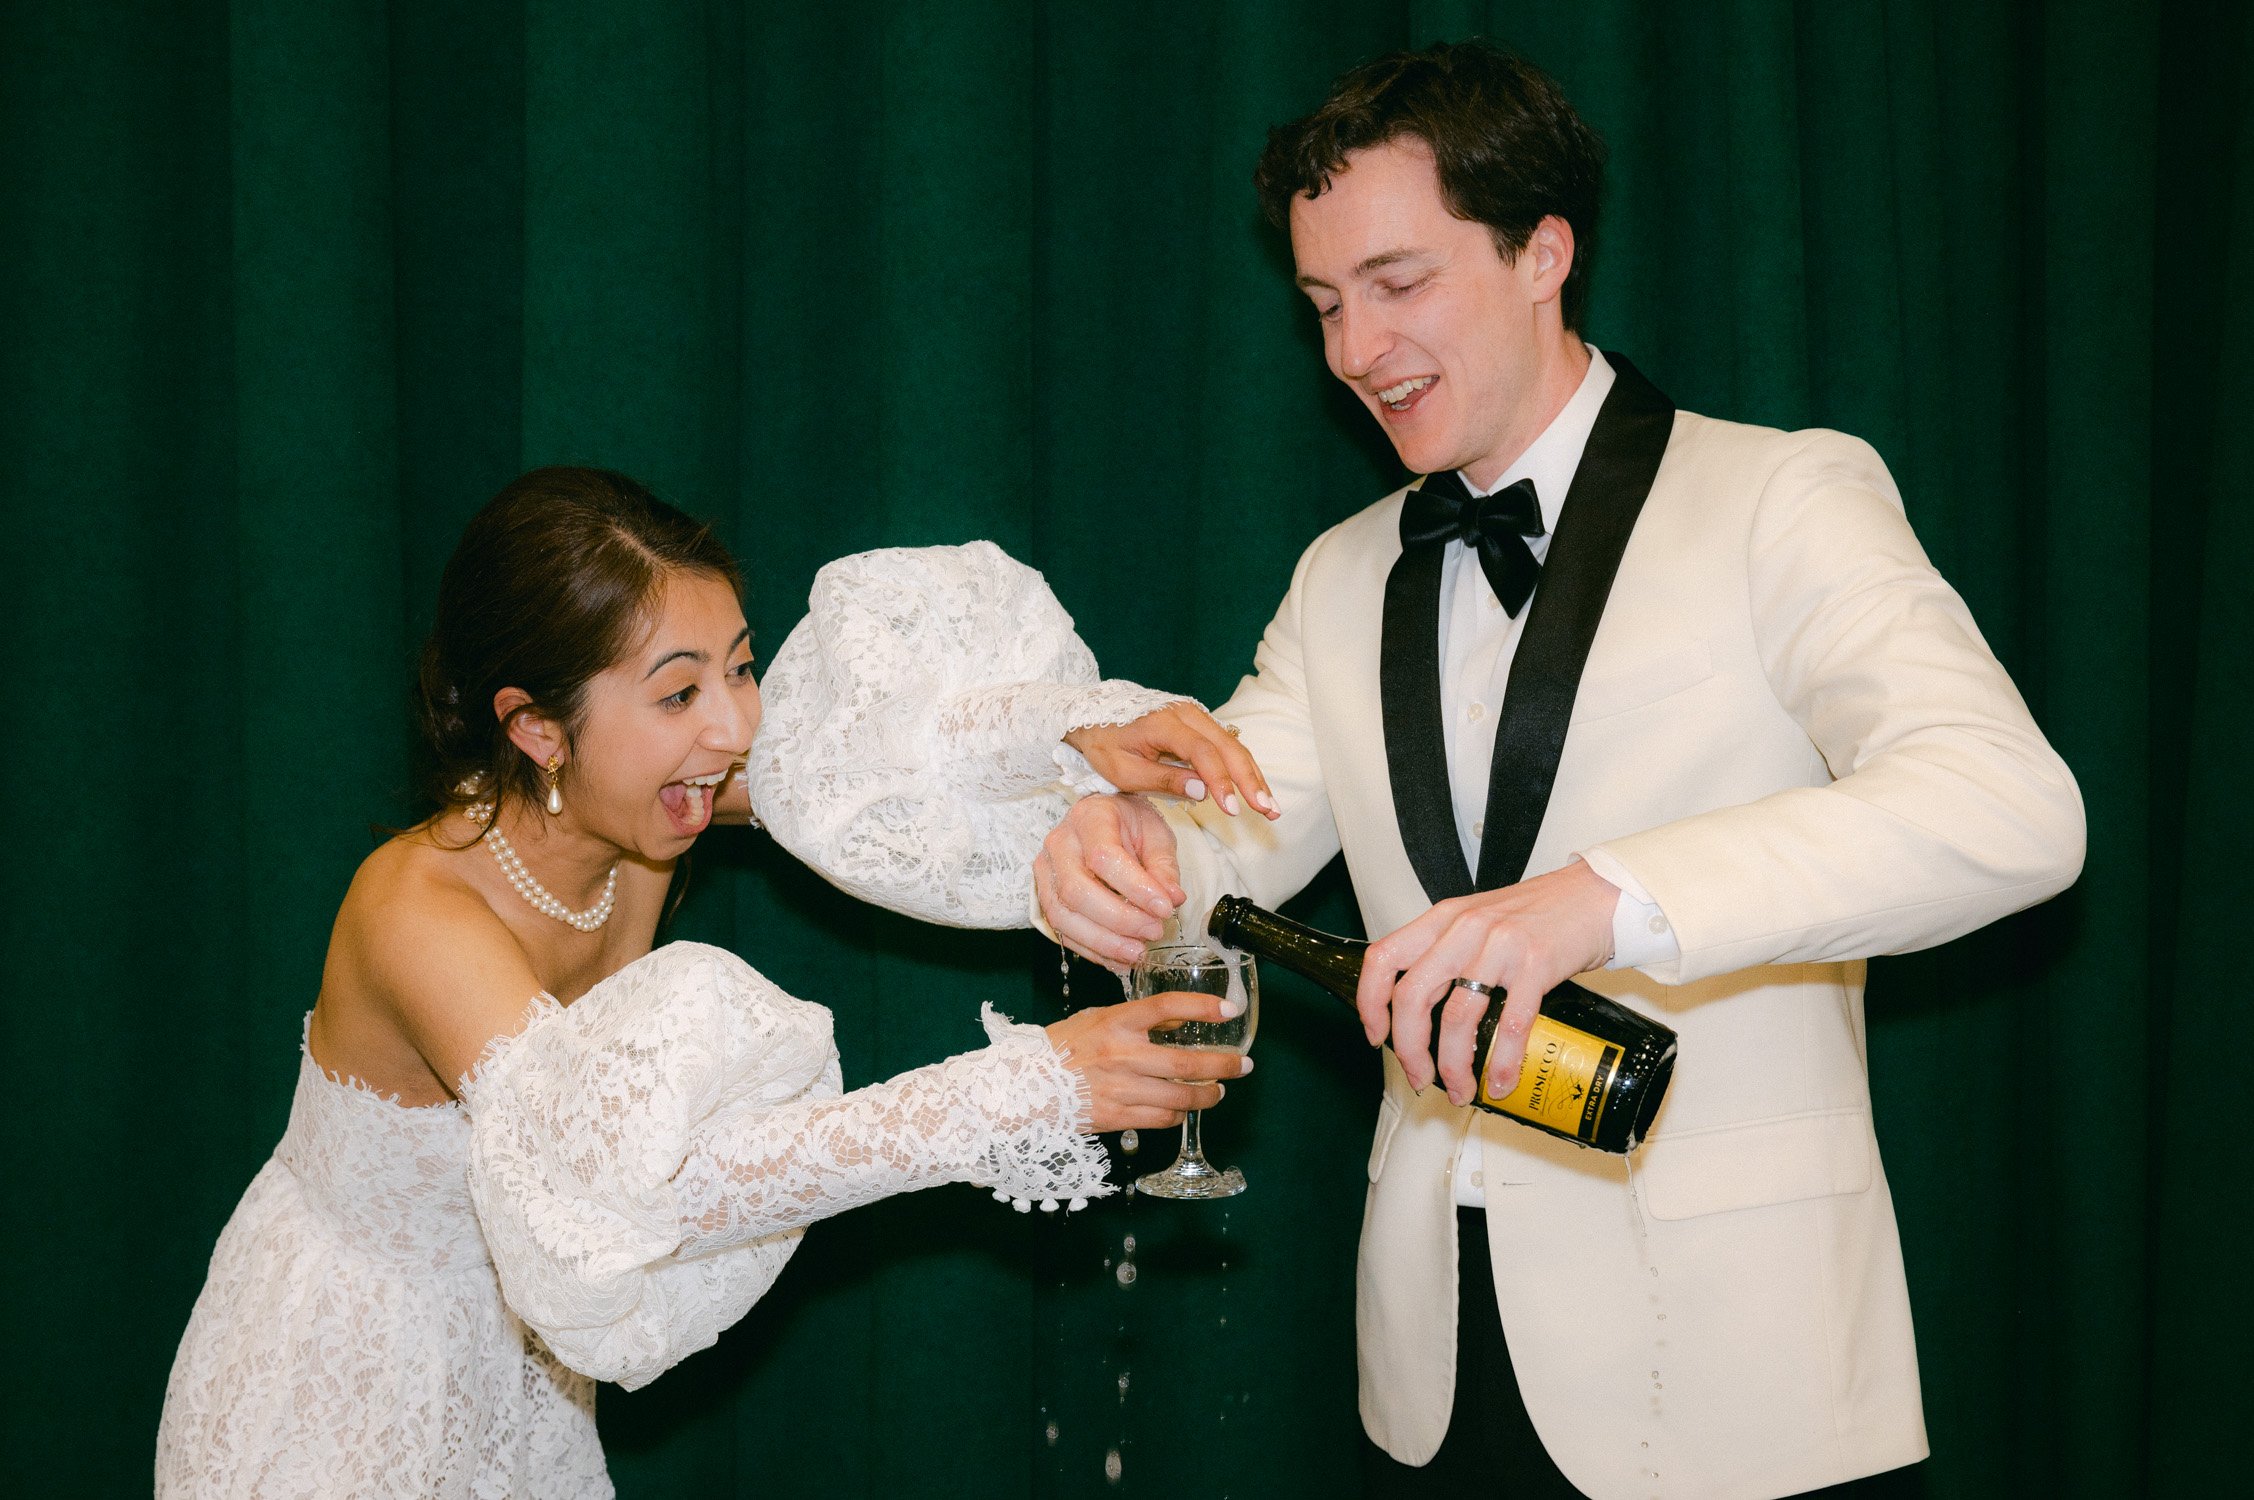 tahoe event center - lake tahoe wedding, photo of the newly wed couple opening a champagne